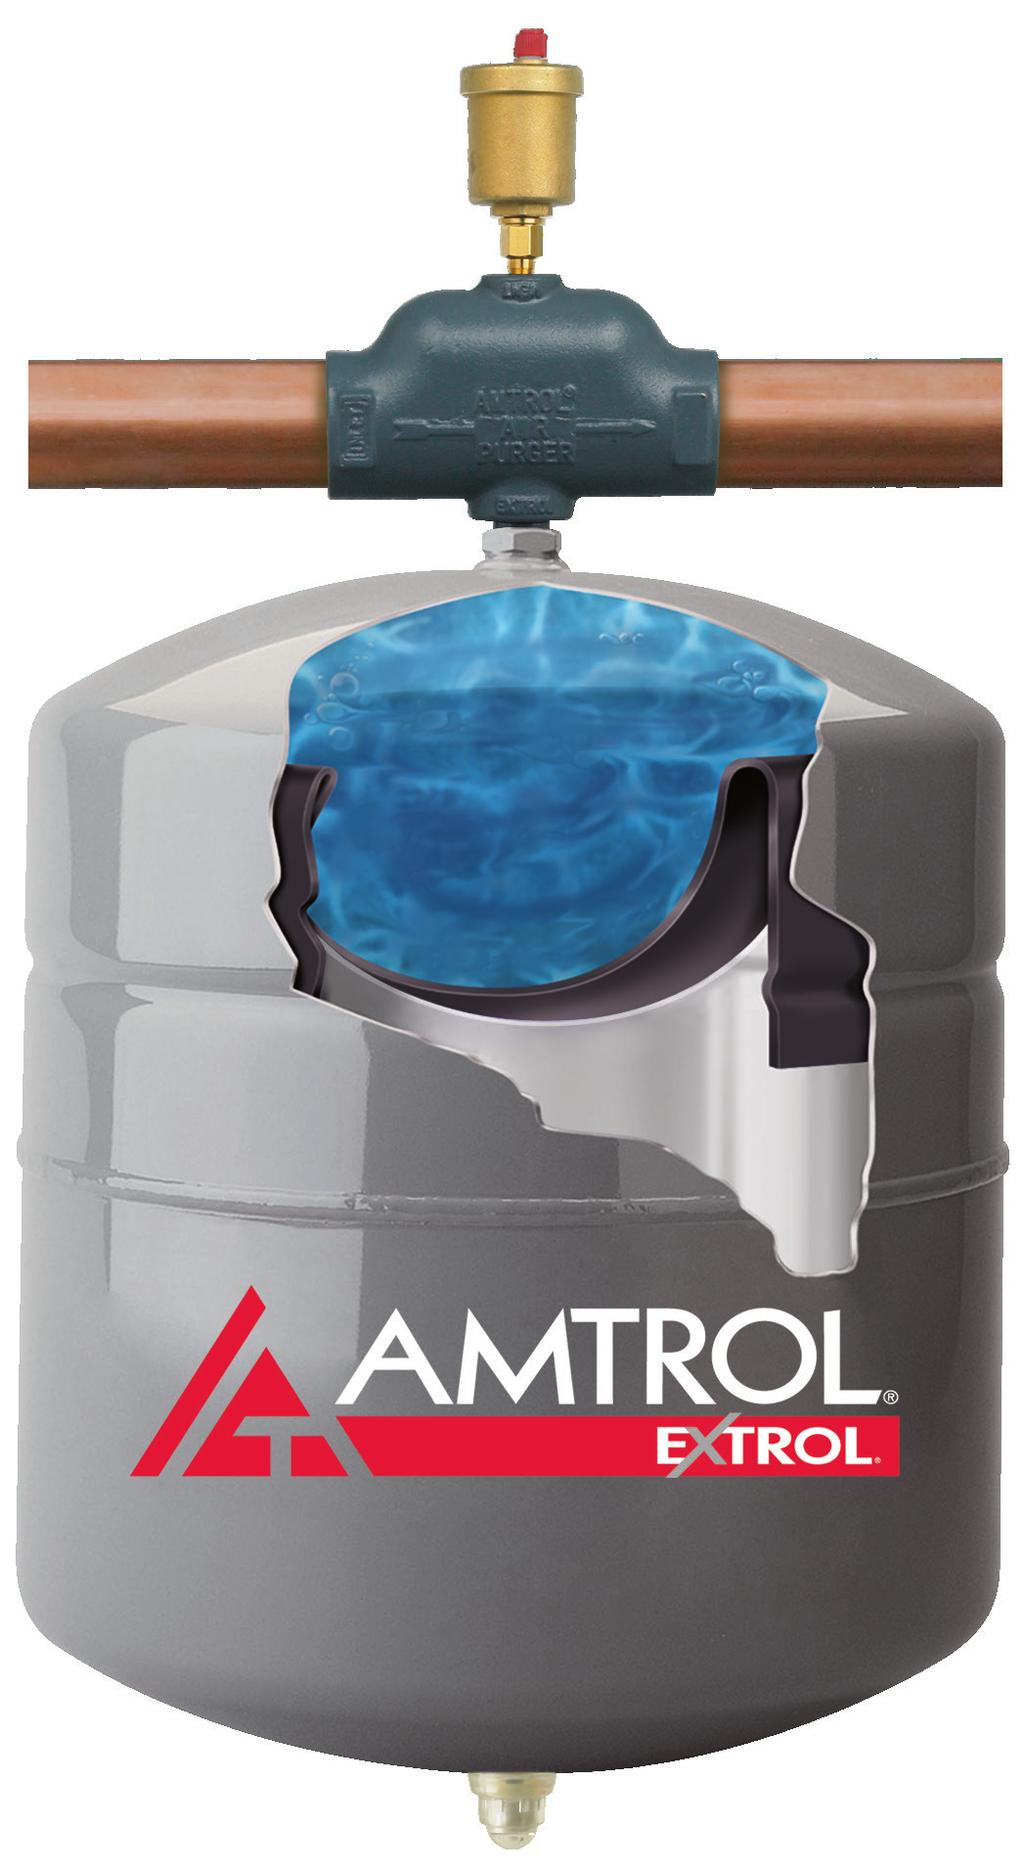 Extrol expansion tanks accept expanded fluid in closed-loop hydronic systems to control pressure buildup, improve comfort and help reduce energy costs.